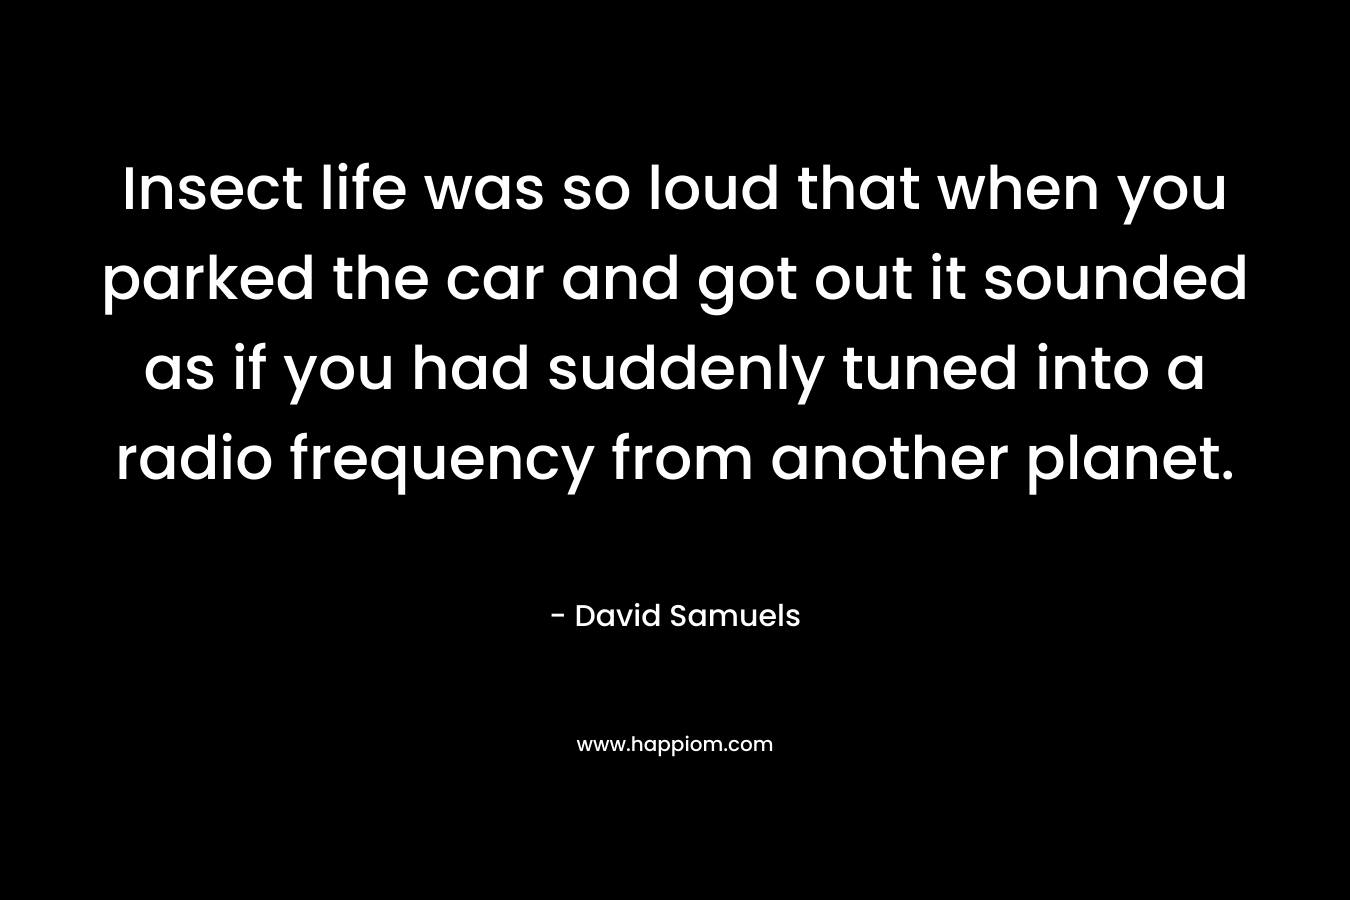 Insect life was so loud that when you parked the car and got out it sounded as if you had suddenly tuned into a radio frequency from another planet. – David Samuels